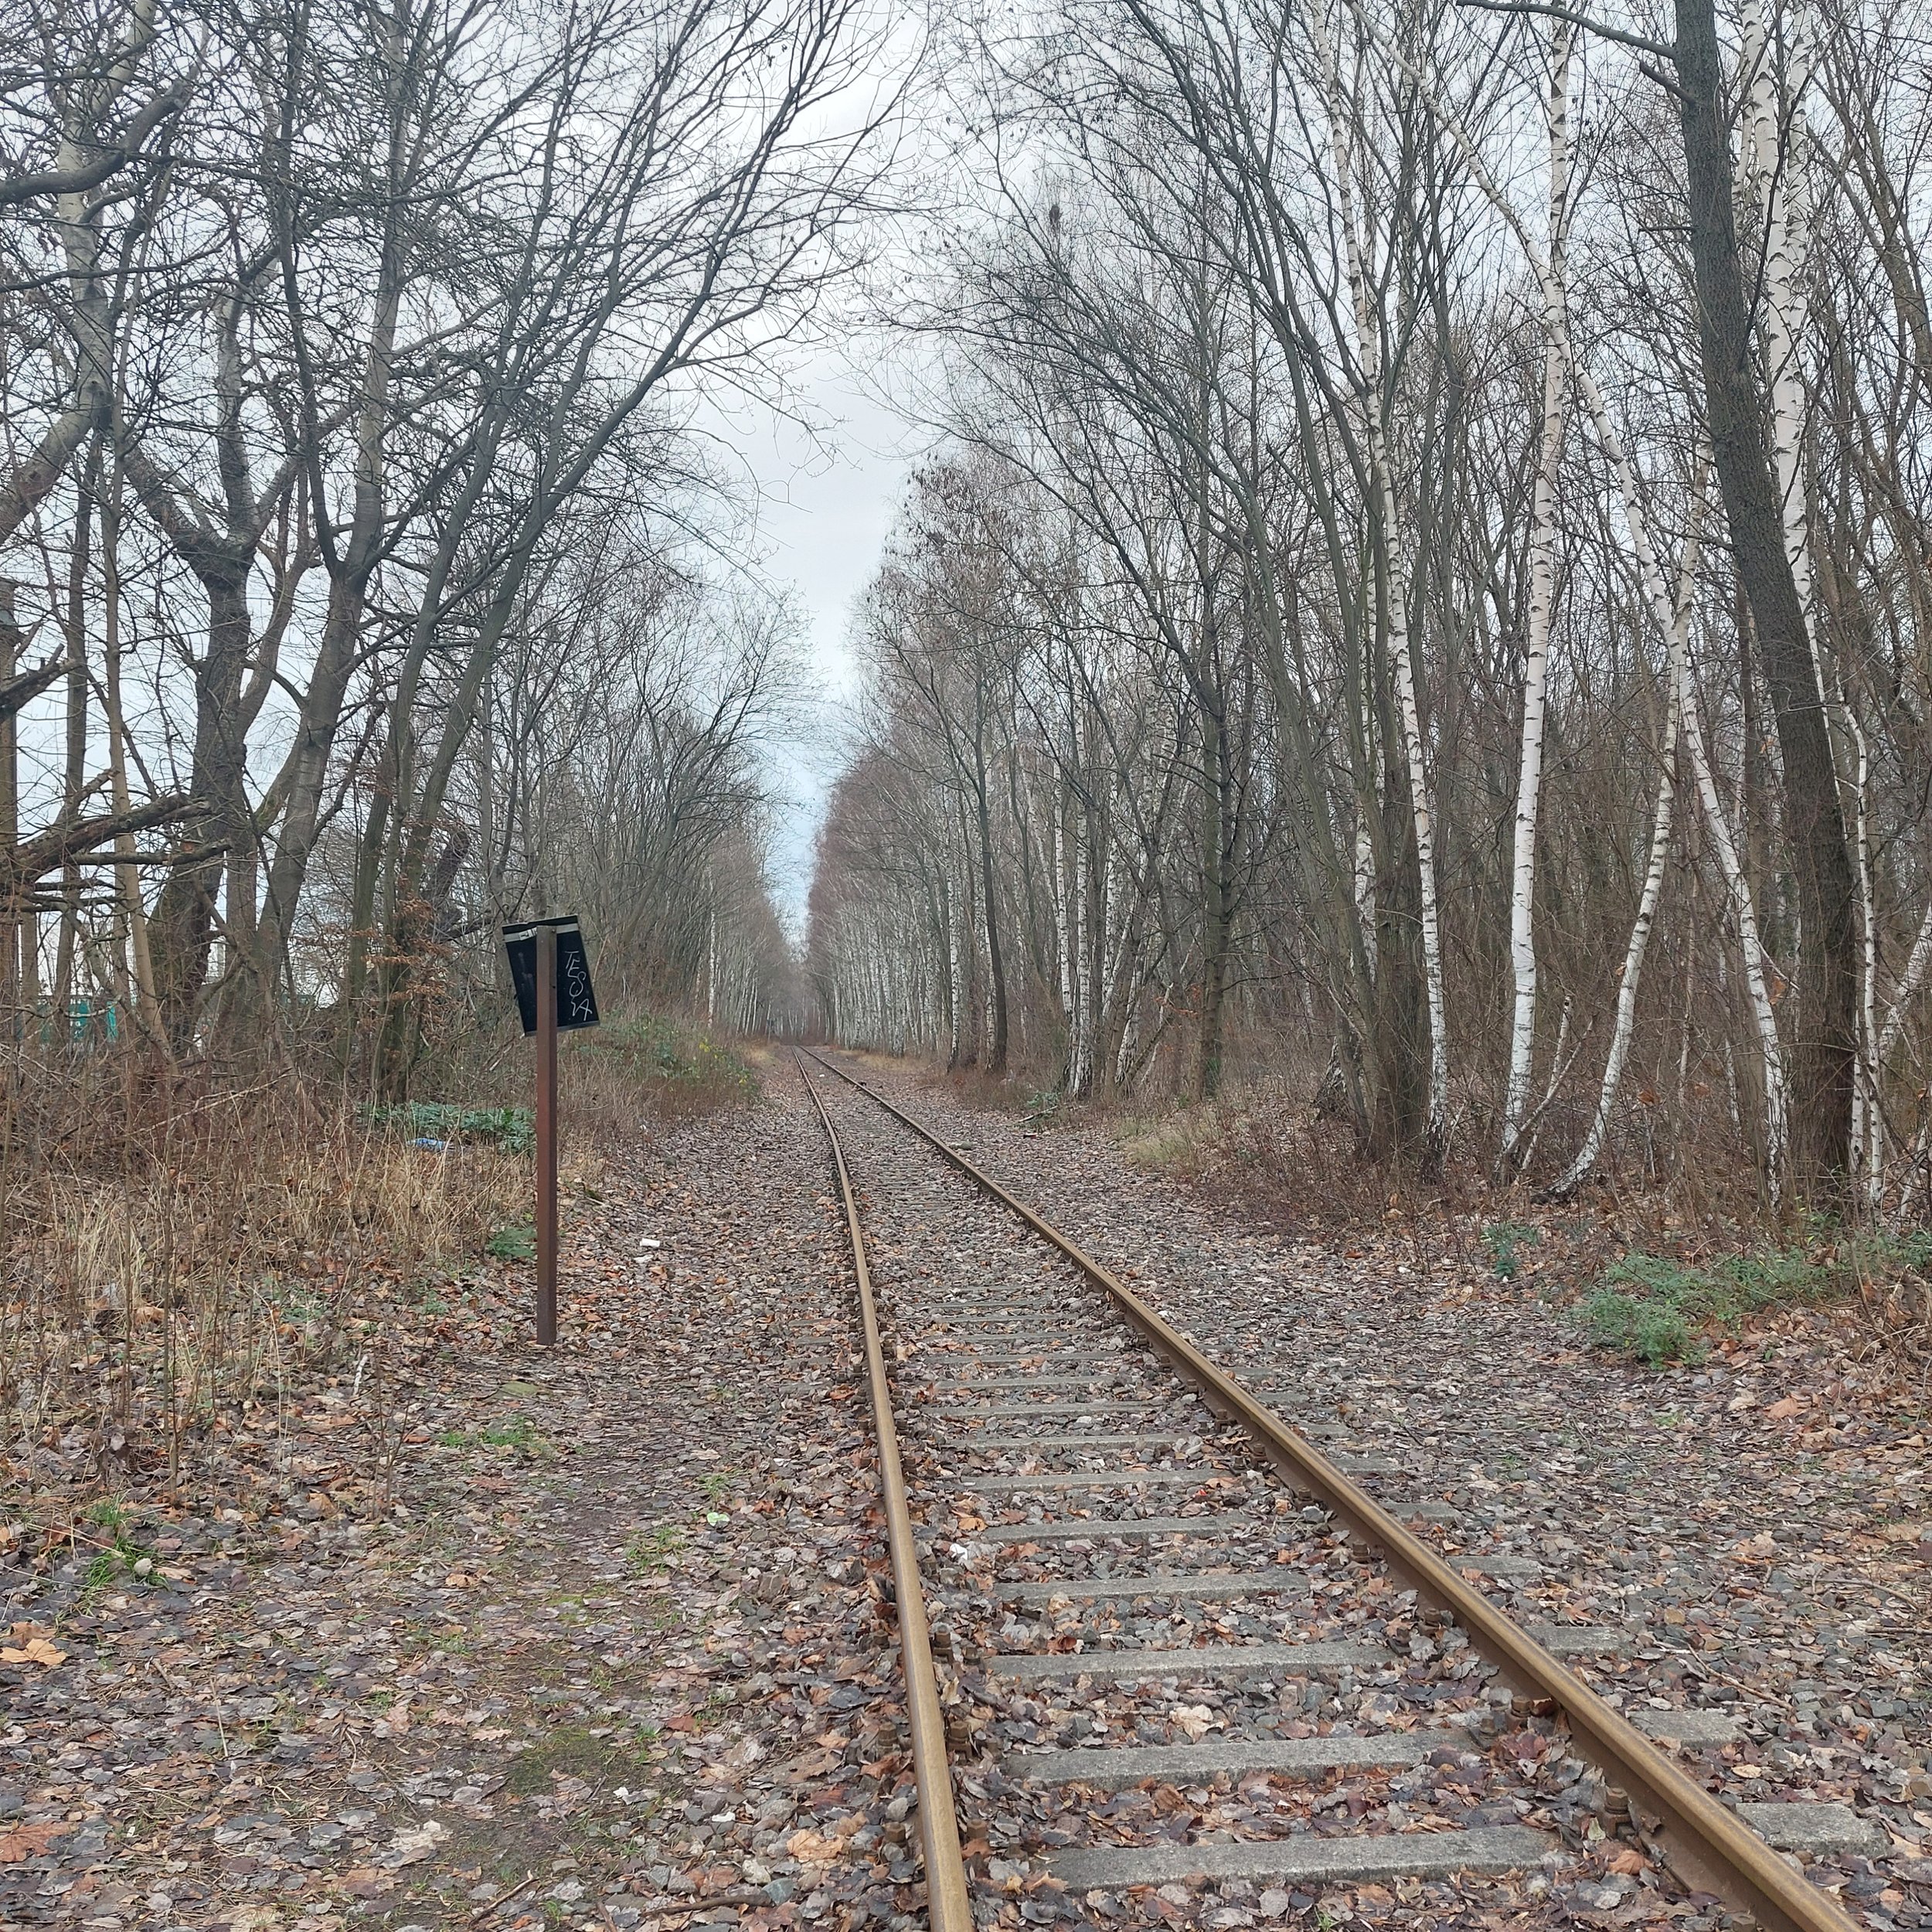 End of the line at Pankow